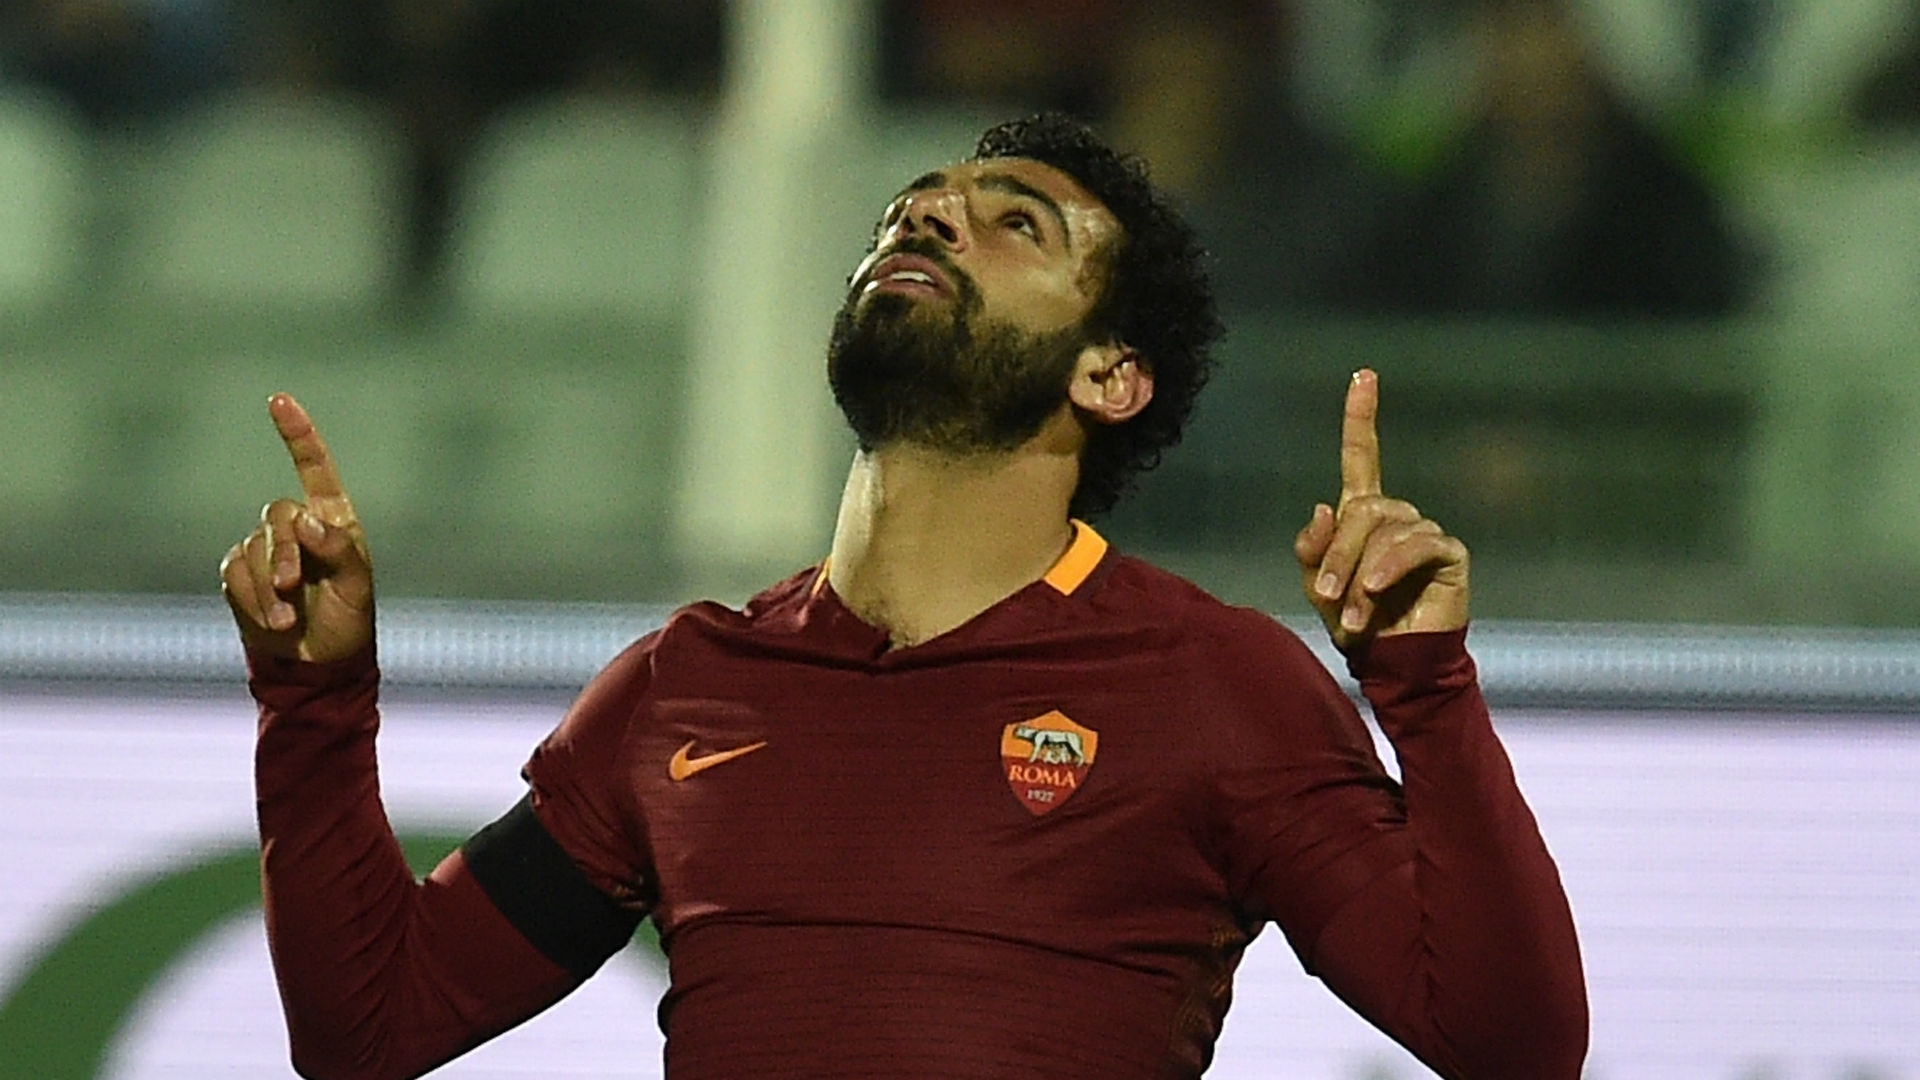 Salah ended up at AS Roma for which he scored 15 goals and managed 11 assists last season.